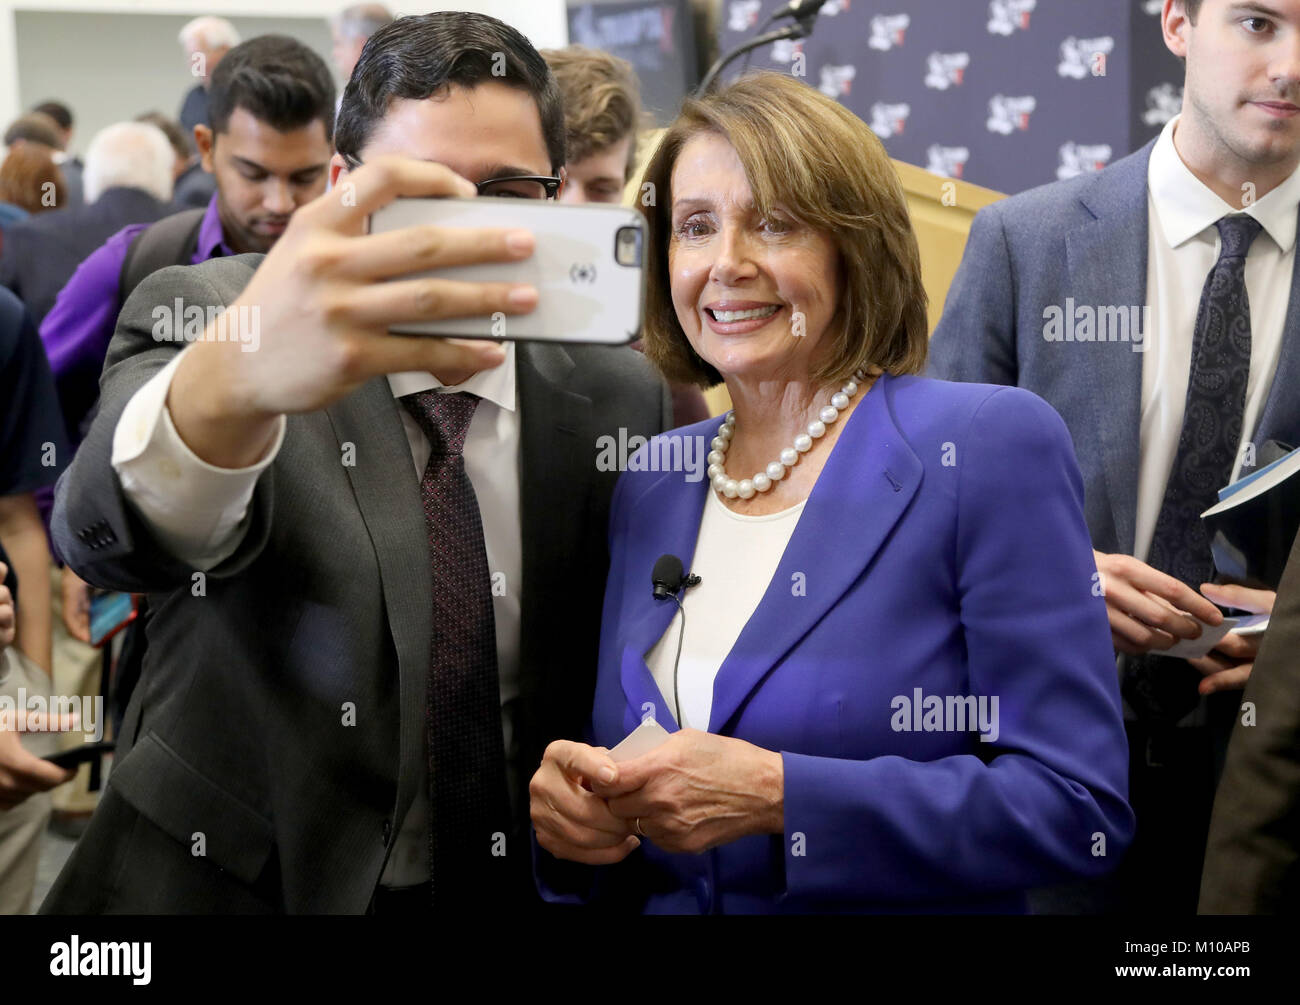 January 27, 2018 - Boca Raton, FL, USA - House Democratic leader Nancy Pelosi poses for a photo after a town hall meeting Thursday hosted by the Florida Atlantic University College Democrat and discuss the new tax law signed by President Donald Trump. Mike Stocker, South Florida Sun-Sentinel  (Credit Image: © Sun-Sentinel via ZUMA Wire) Stock Photo